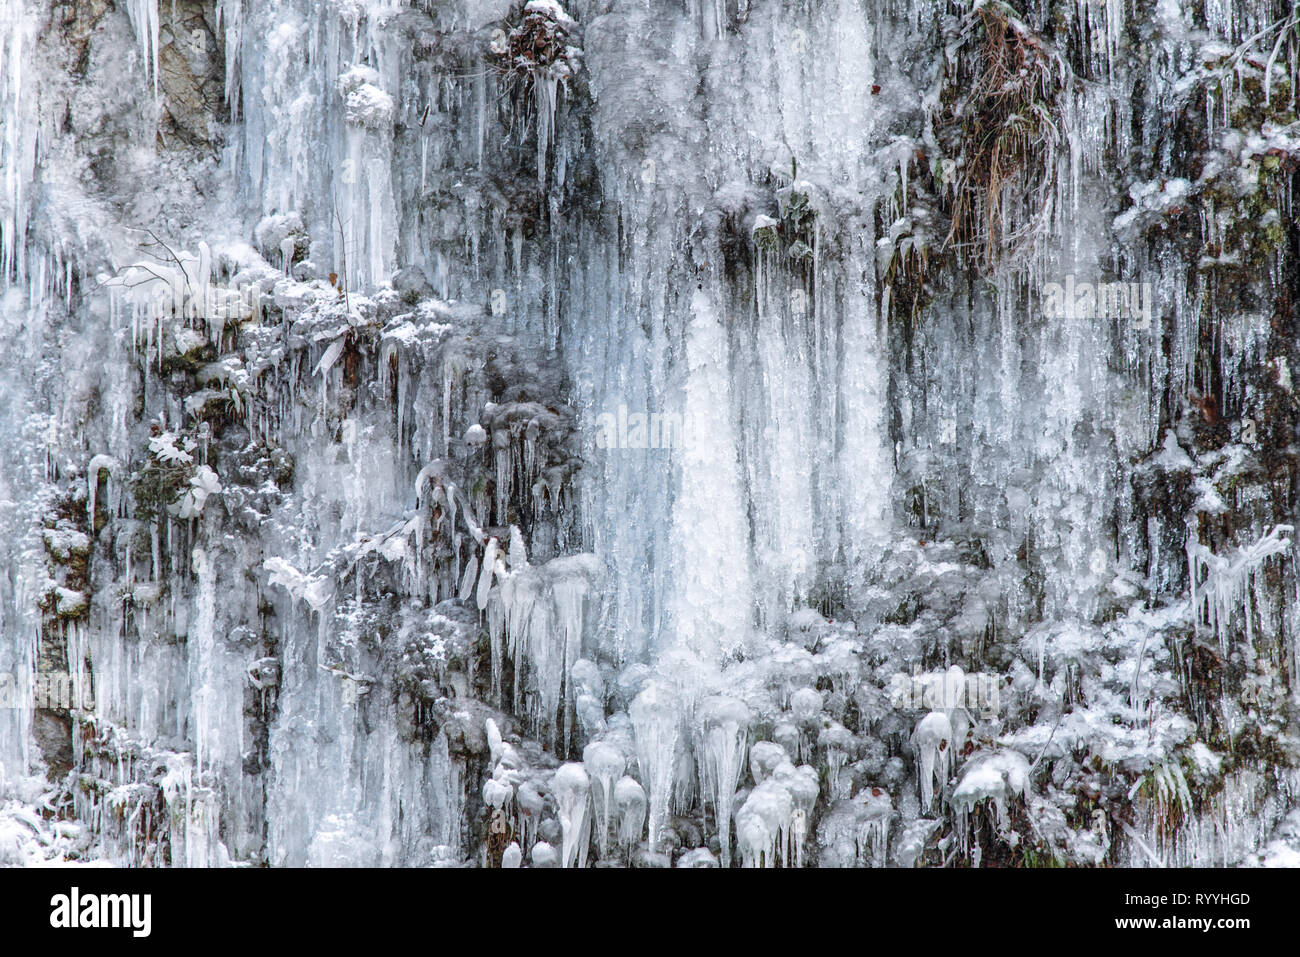 Ice sculptures on the rock, winter detail, beautiful winter pattern, abstract nature Stock Photo